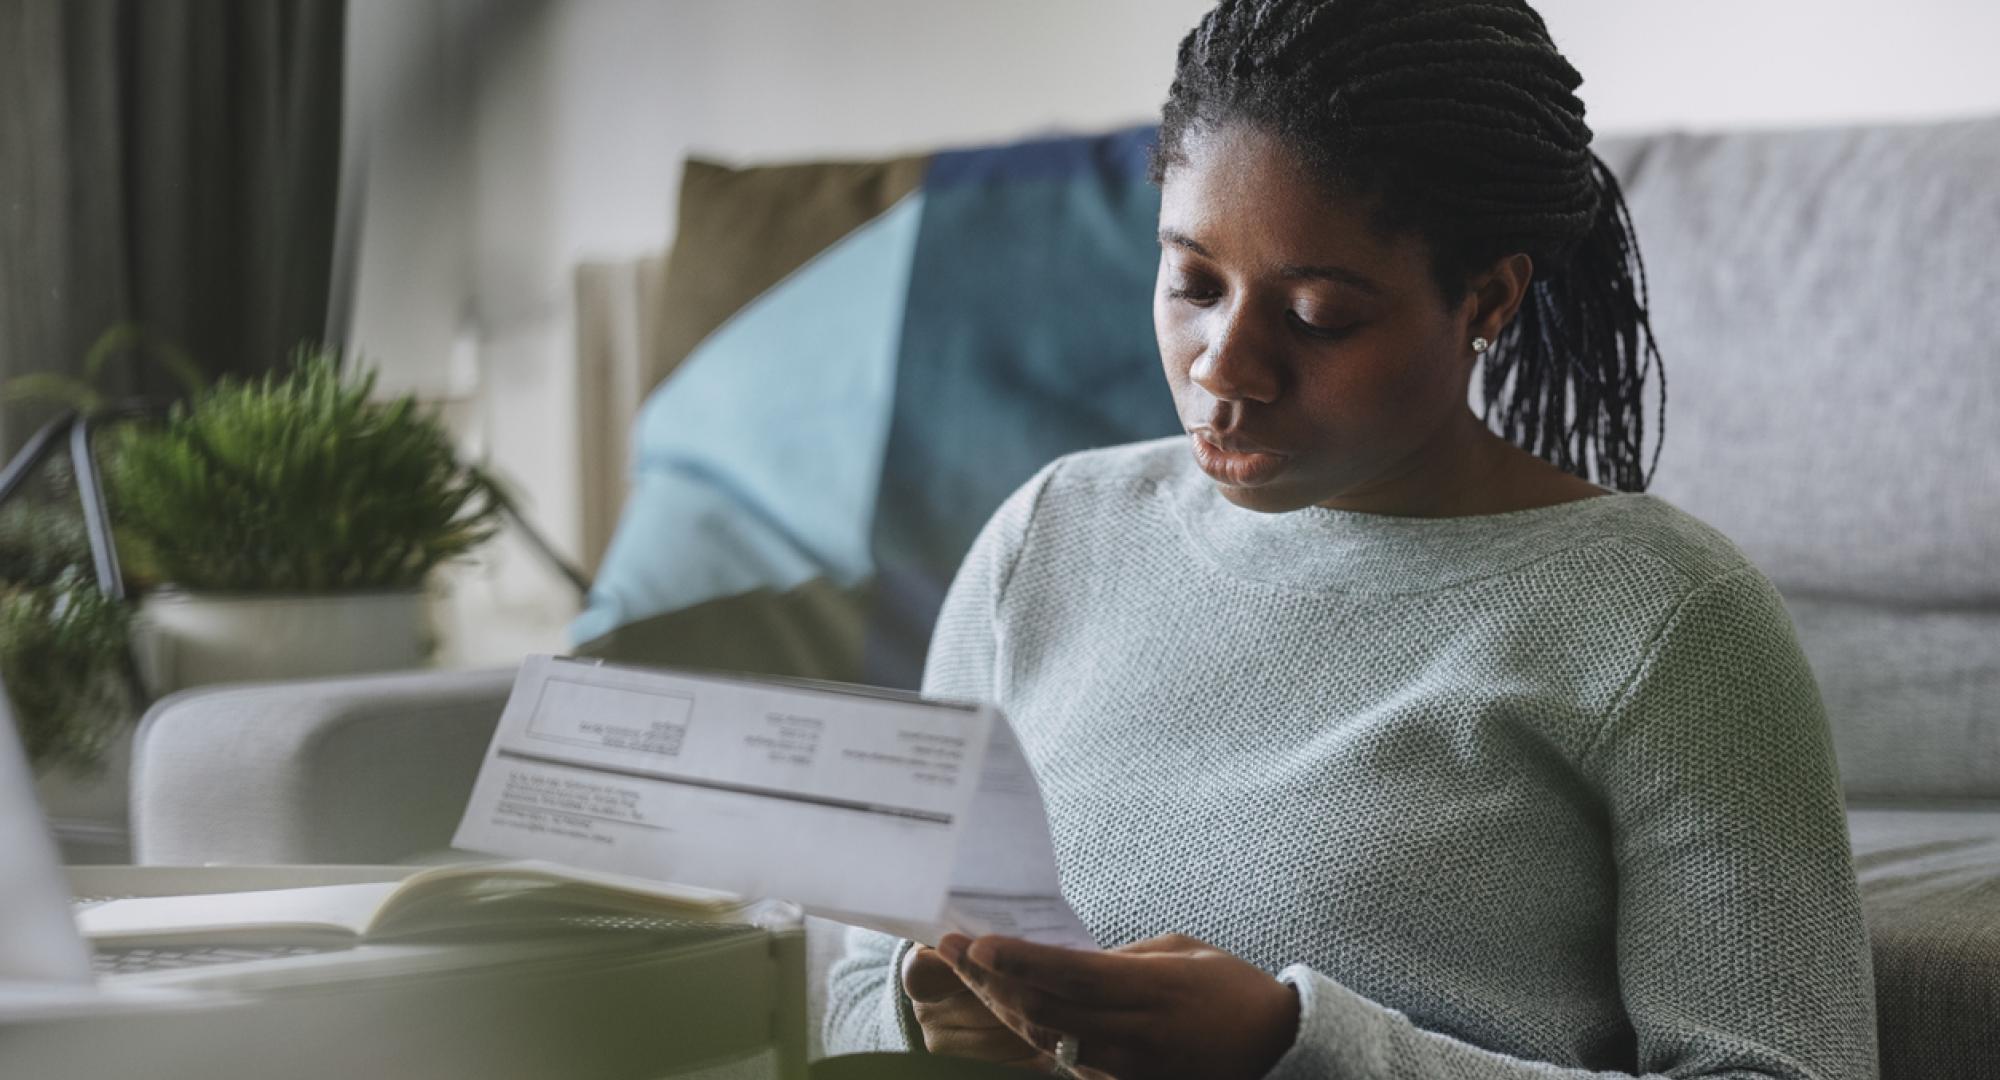 Young woman reading energy bill looking concerned